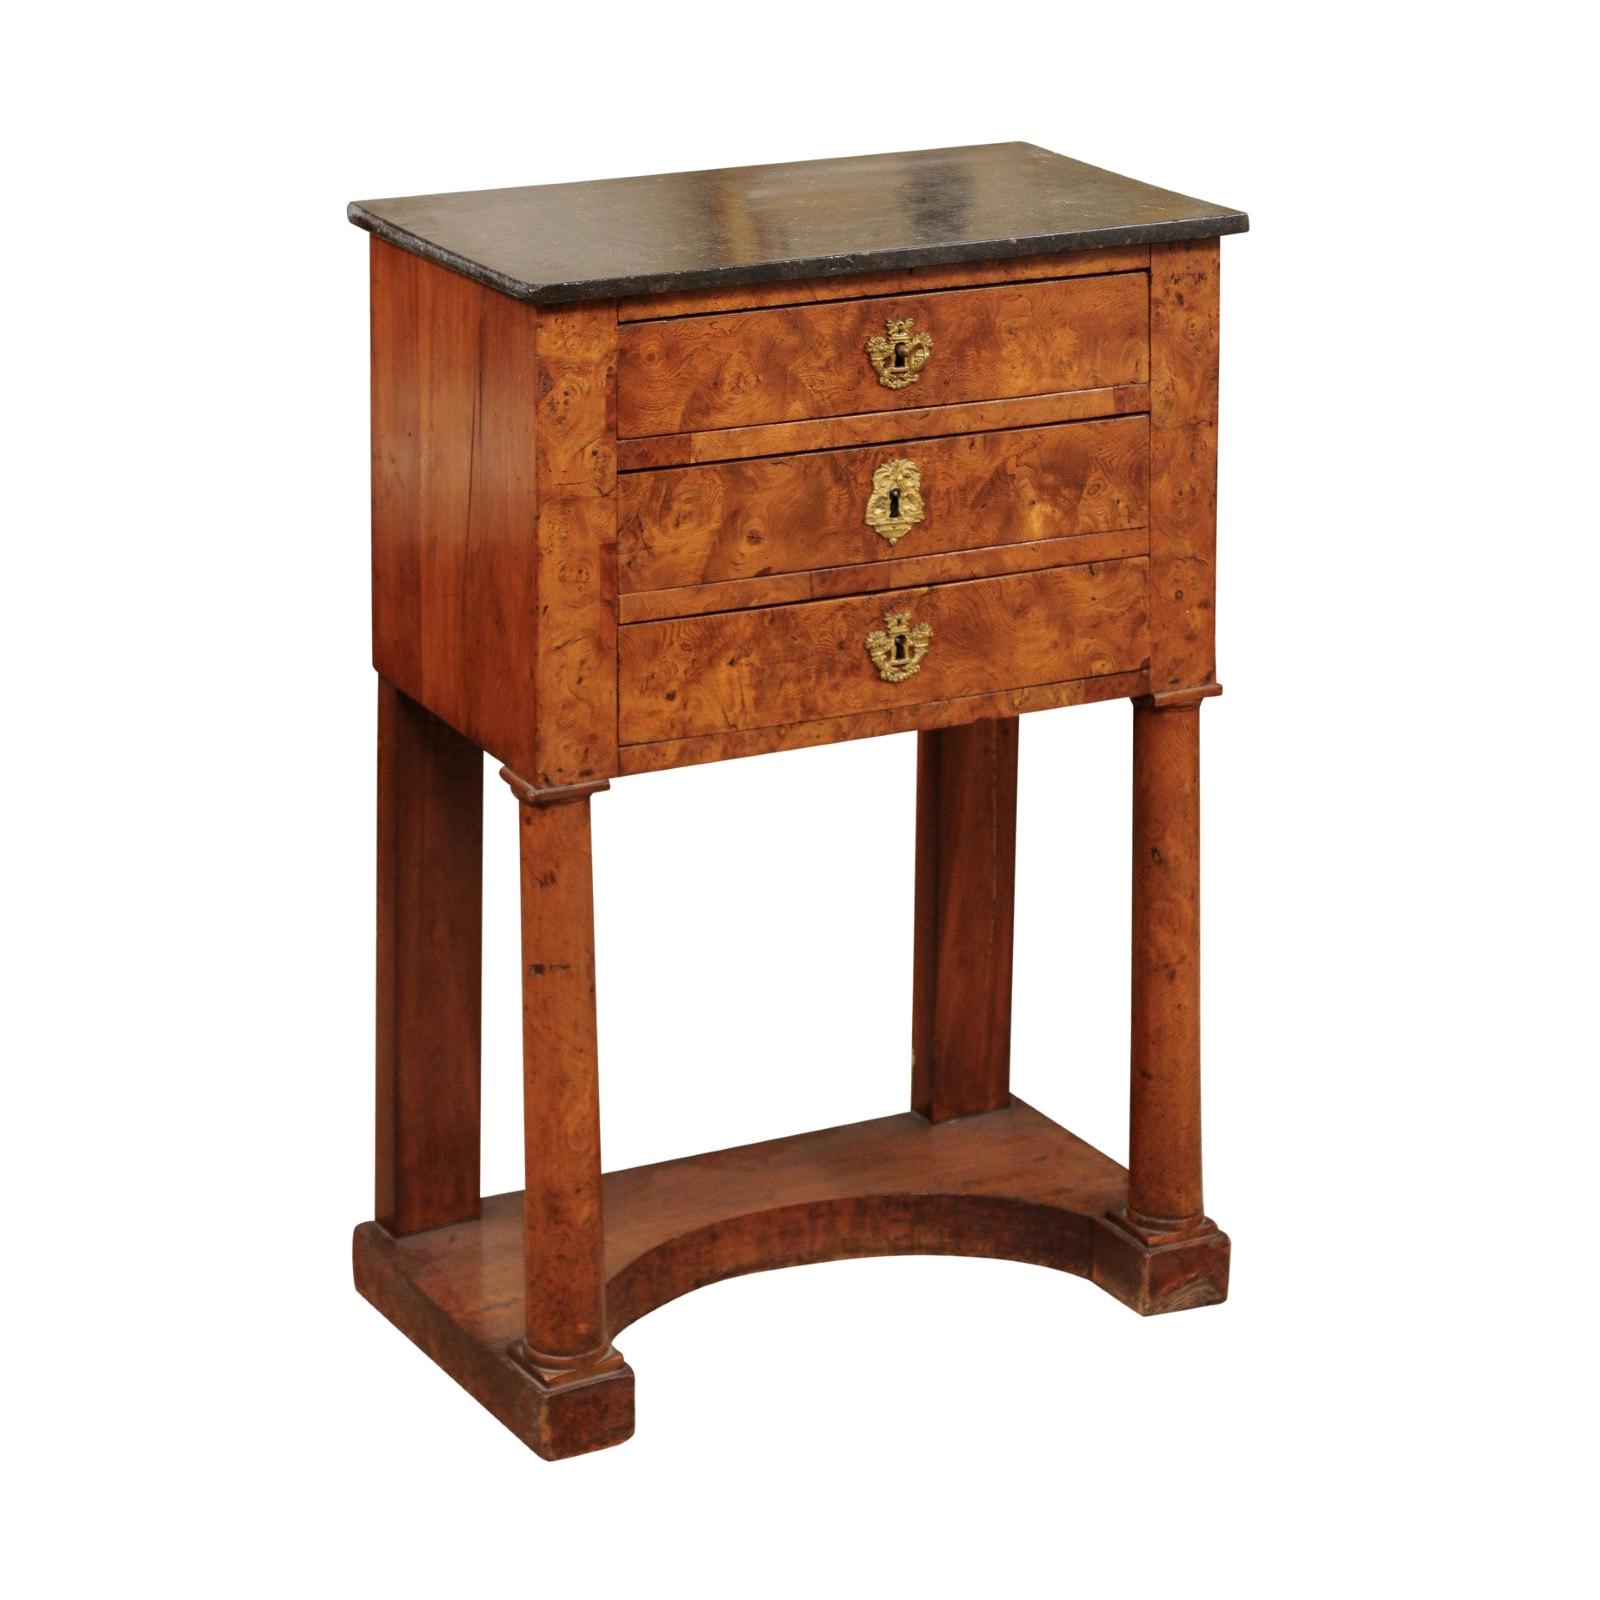 Burled Elm Empire Bedside Commode, Early 19th Century